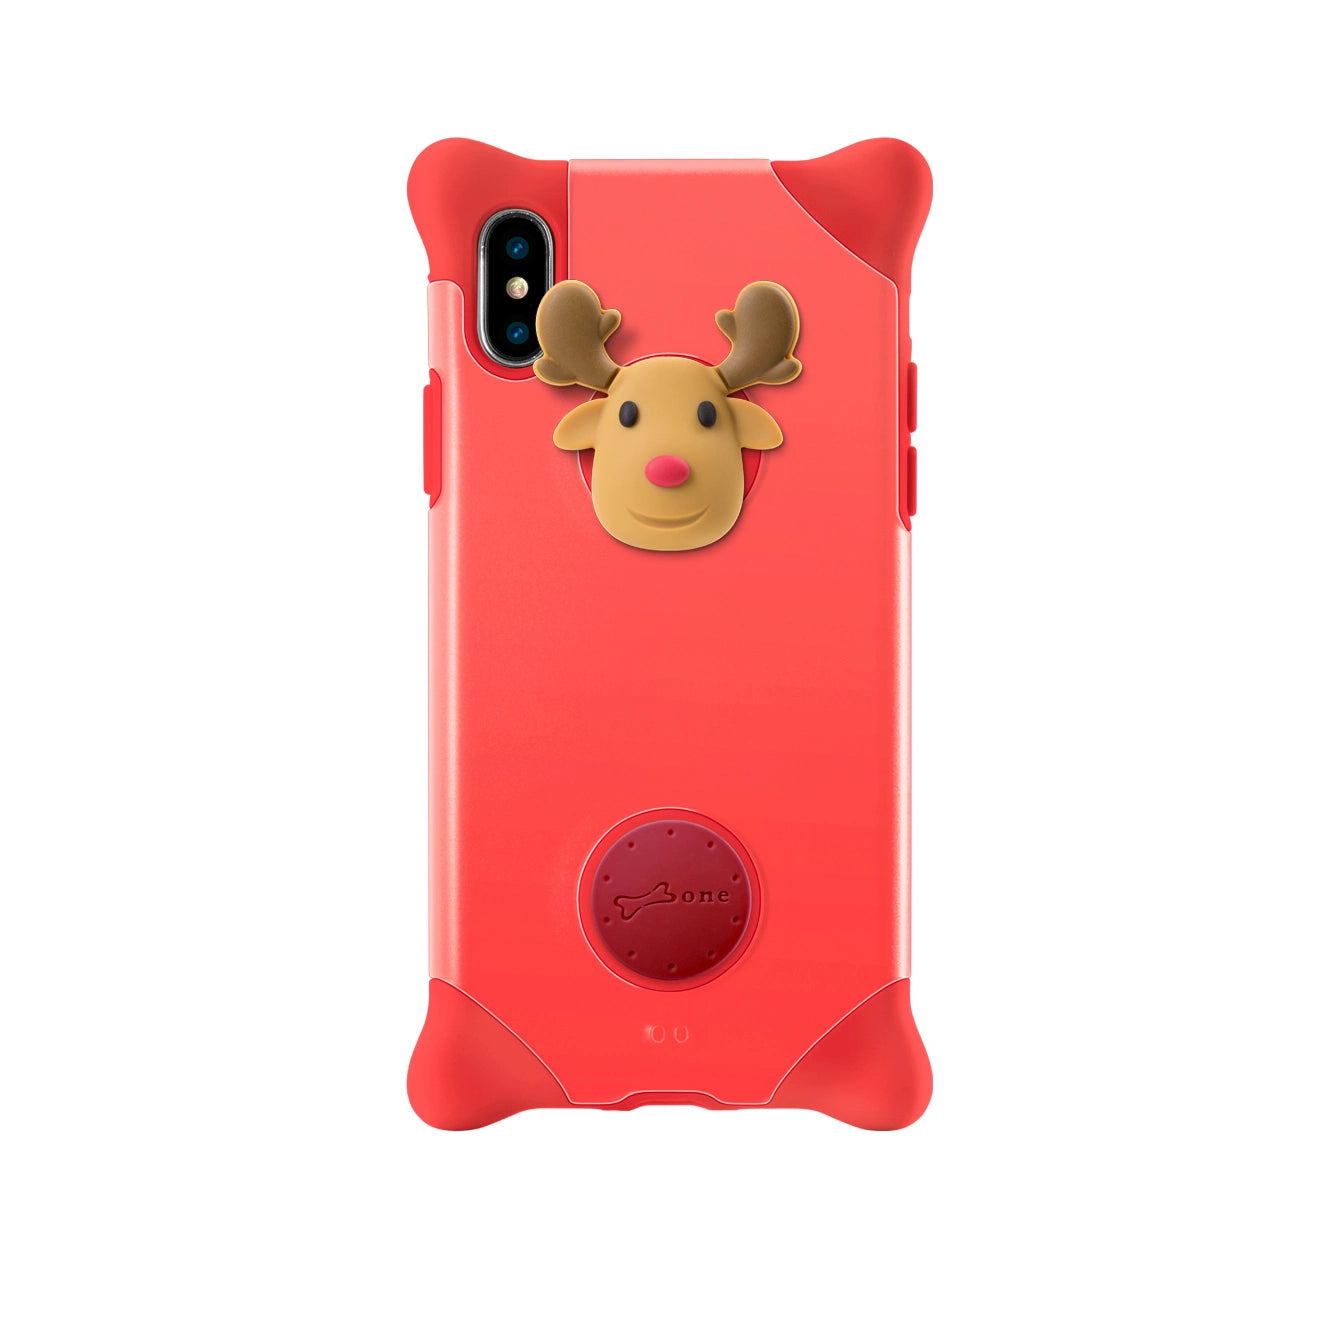 Cute iPhonex Panda Bubble Phone Case (Shipping not included)